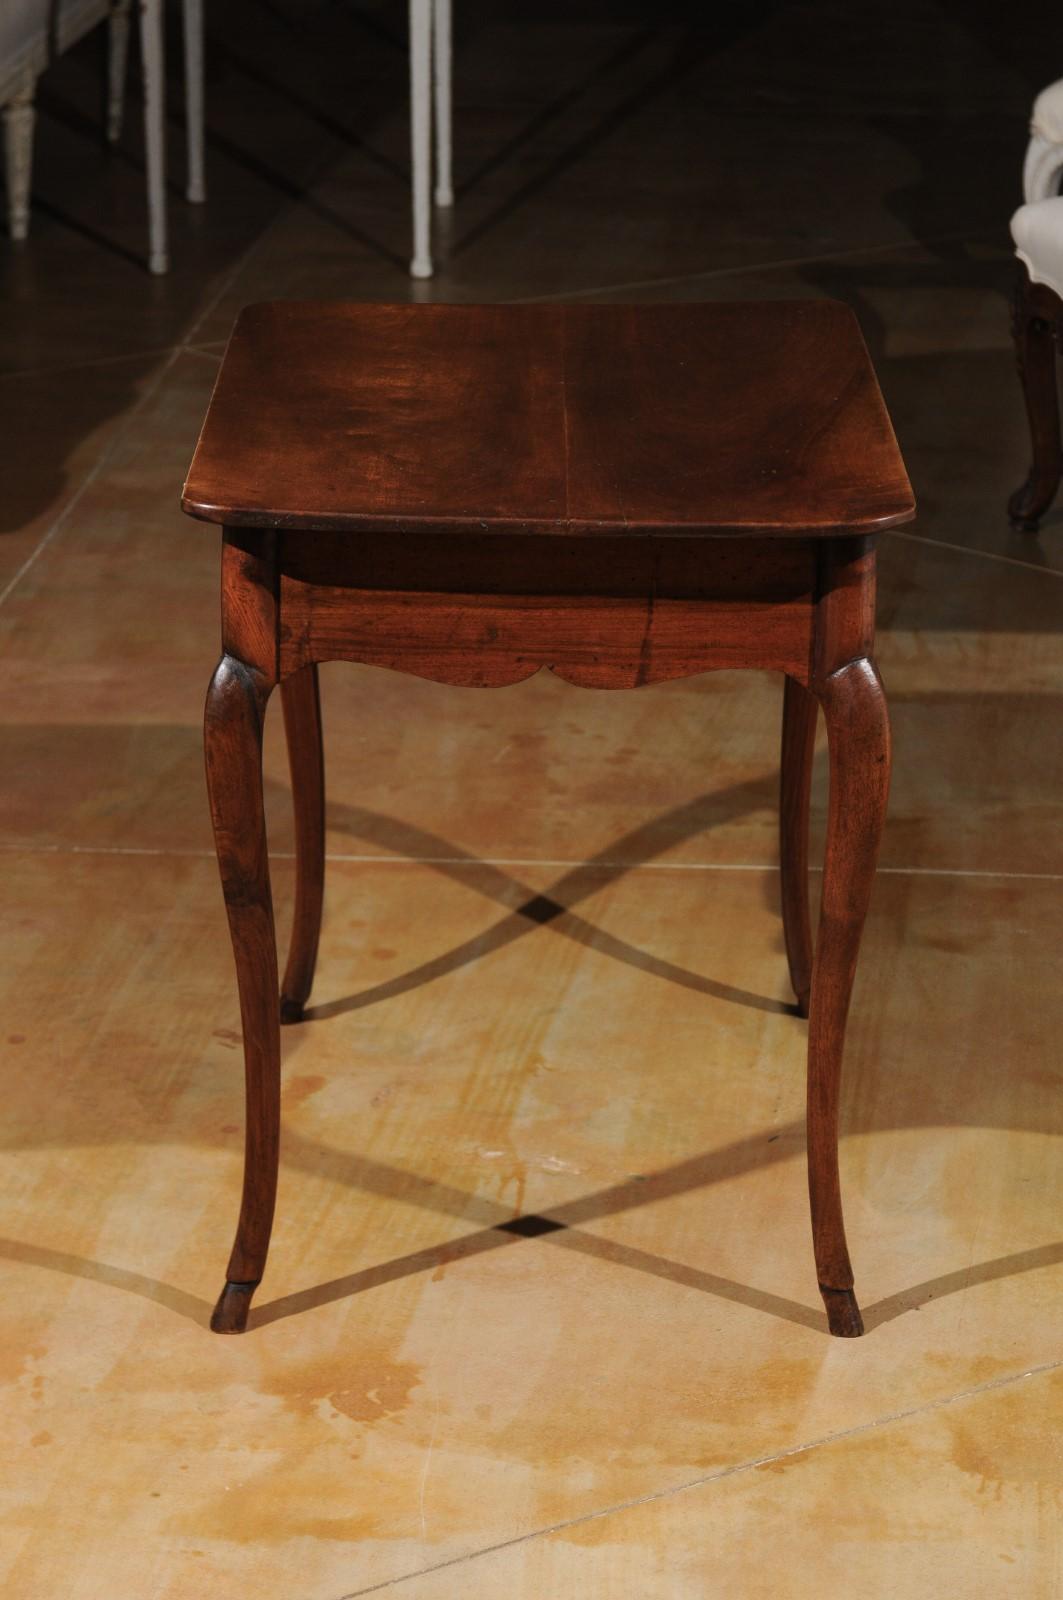 French 1750s Louis XV Walnut Table with Acacia Legs from the Rhône Valley (Walnuss)